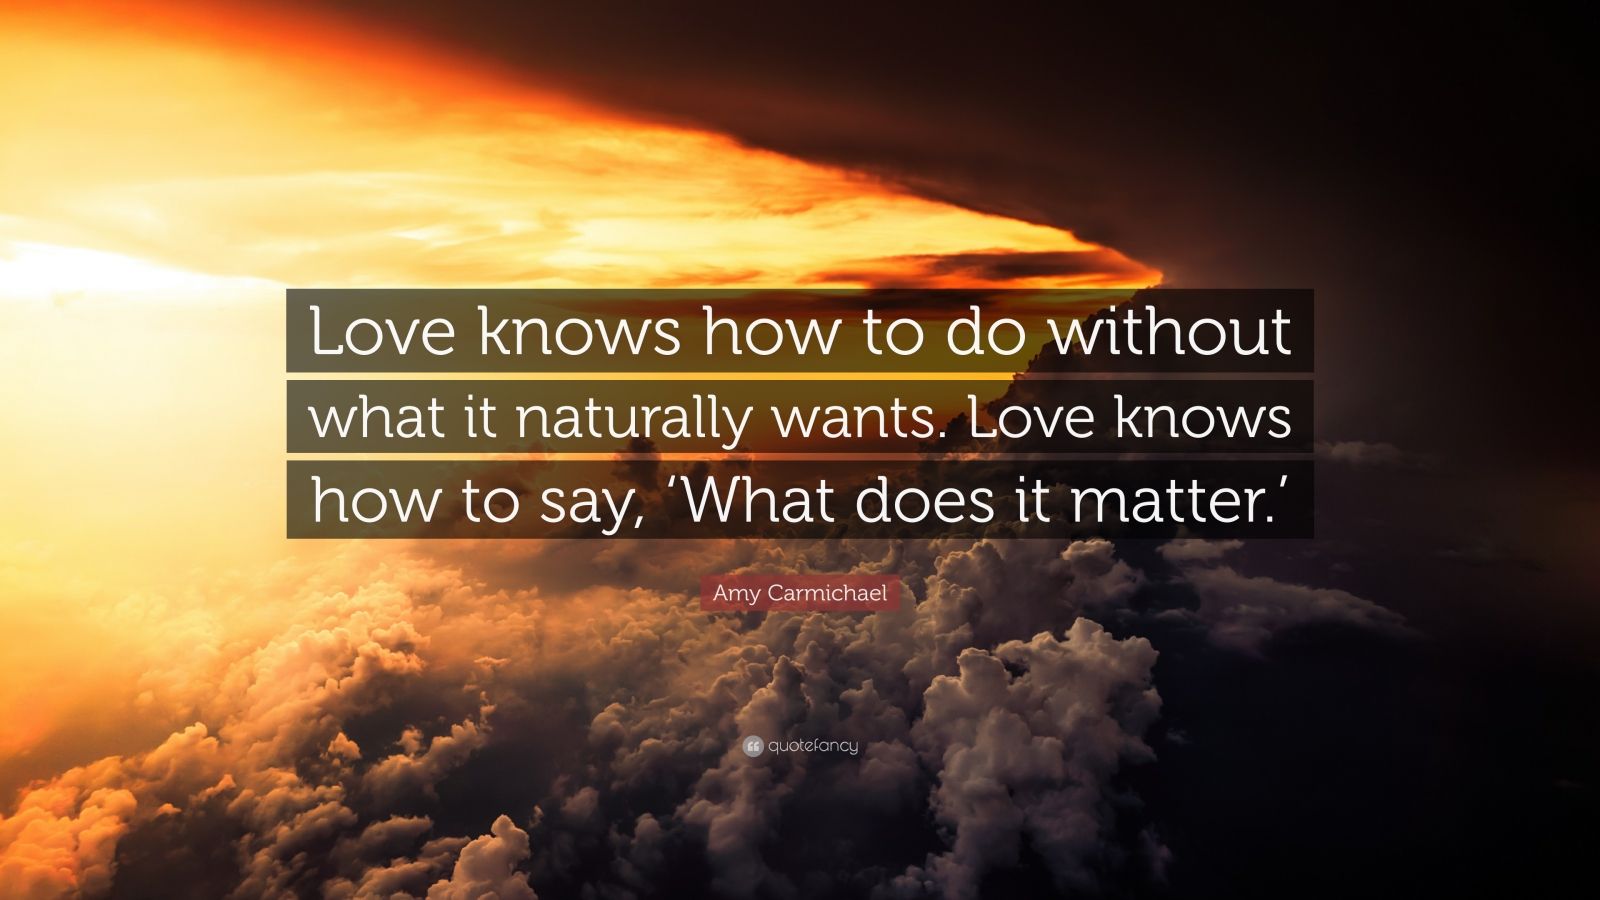 Amy Carmichael Quote “Love knows how to do without what